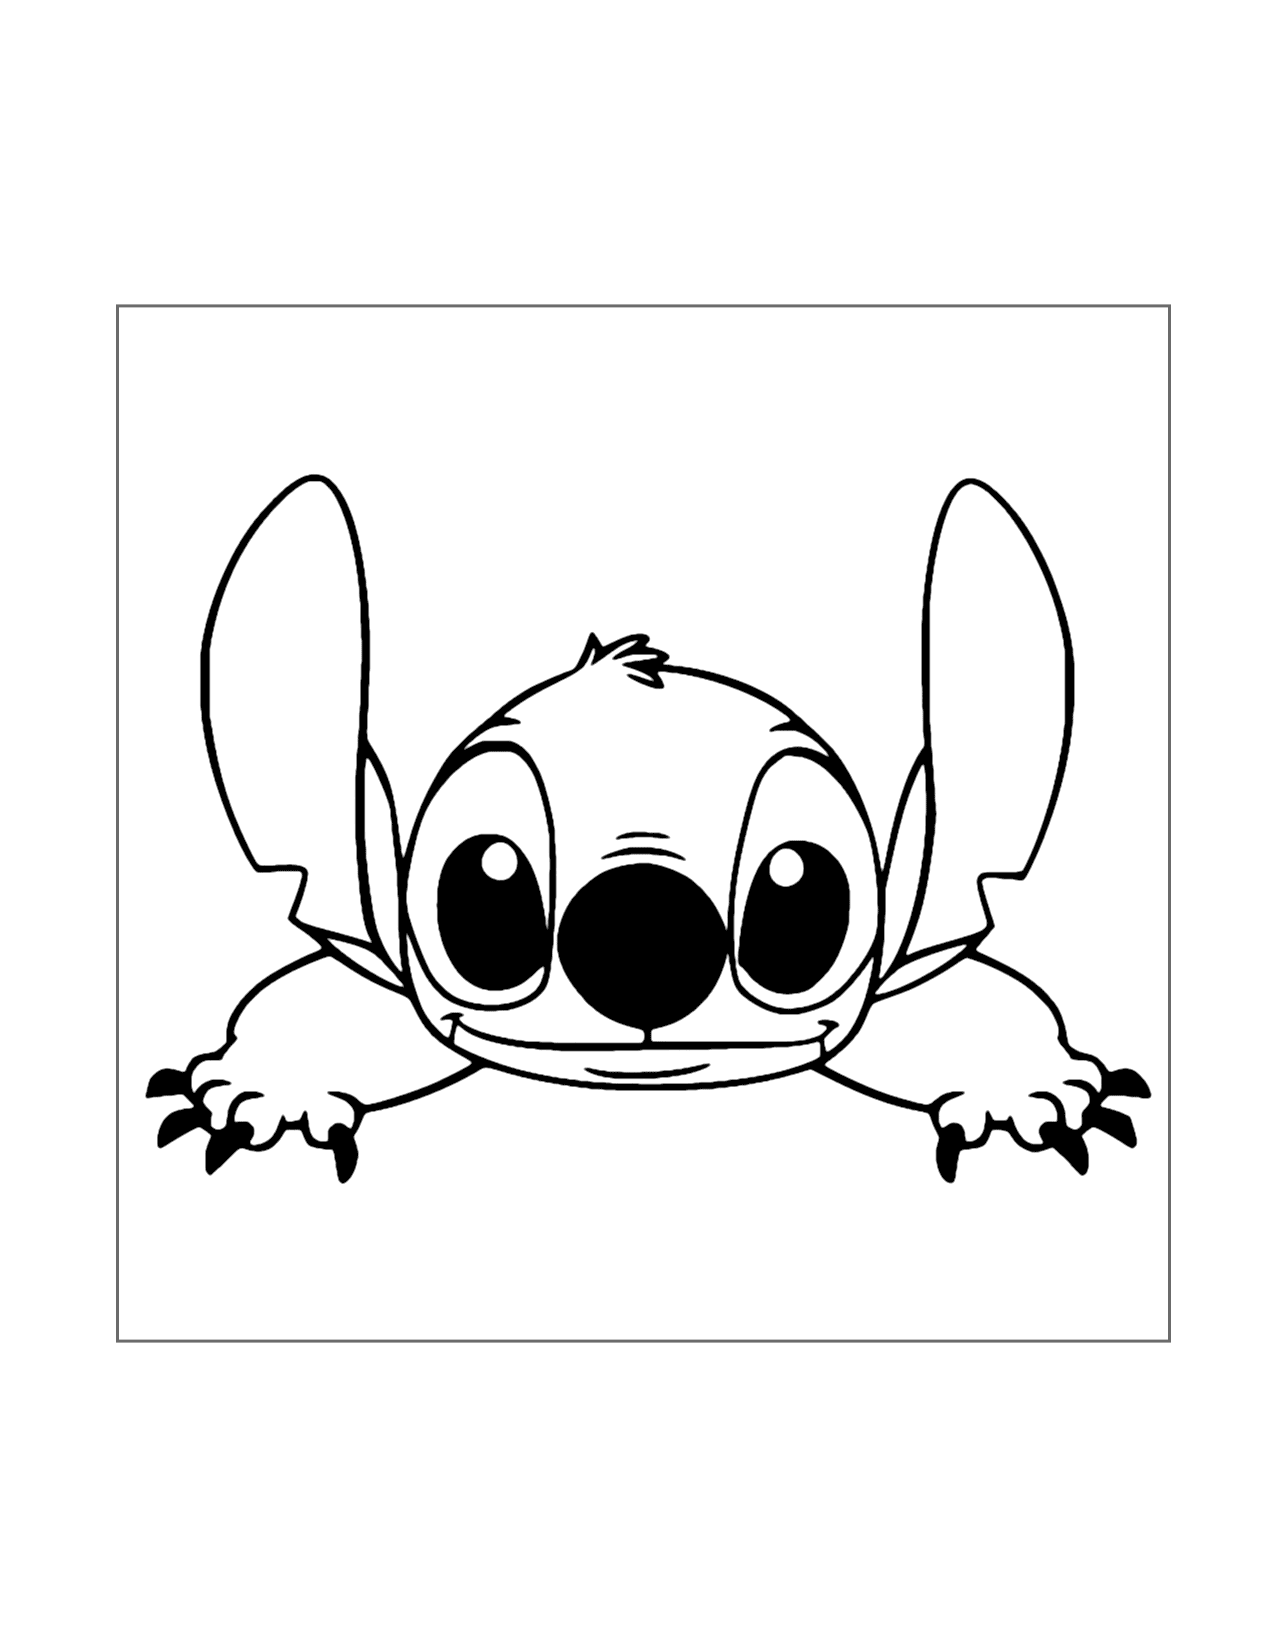 Cutest Stitch Coloring Page